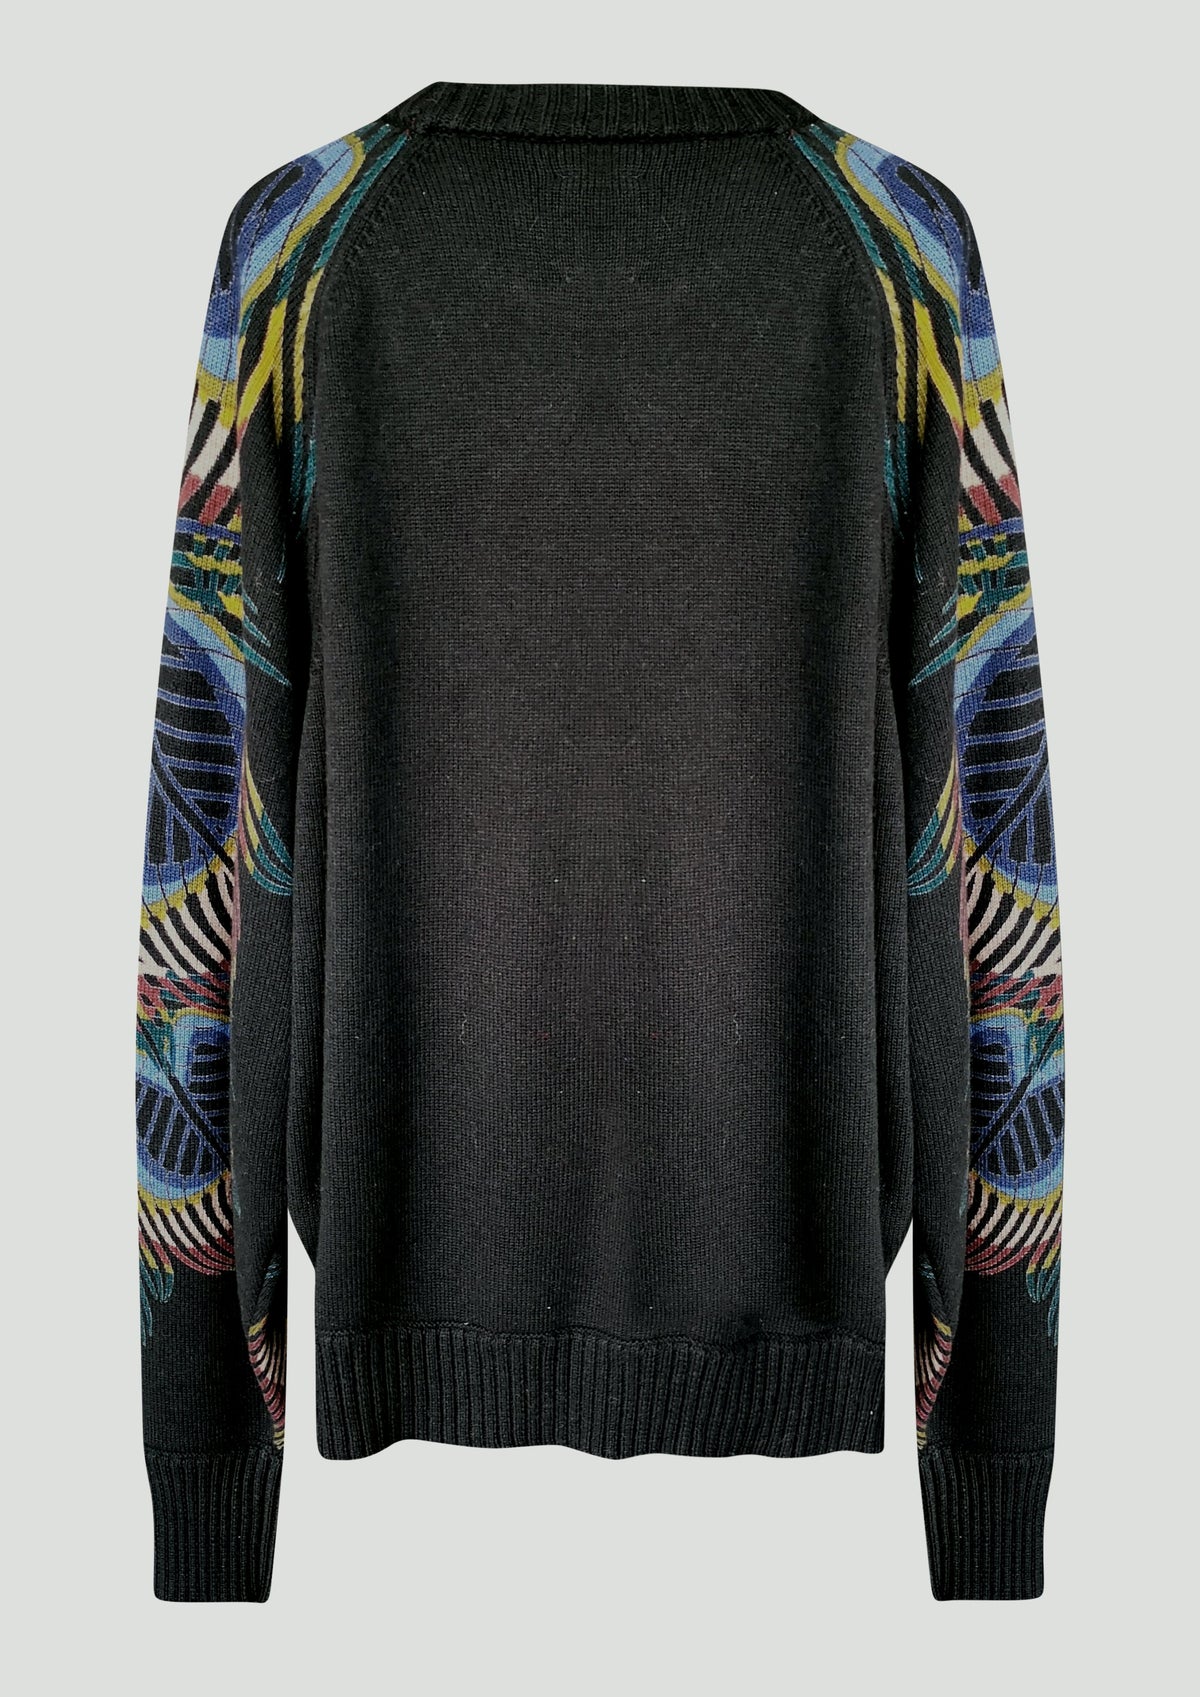 SWEATER OVERSIZED - KNIT PEACOCK color print by BERENIK